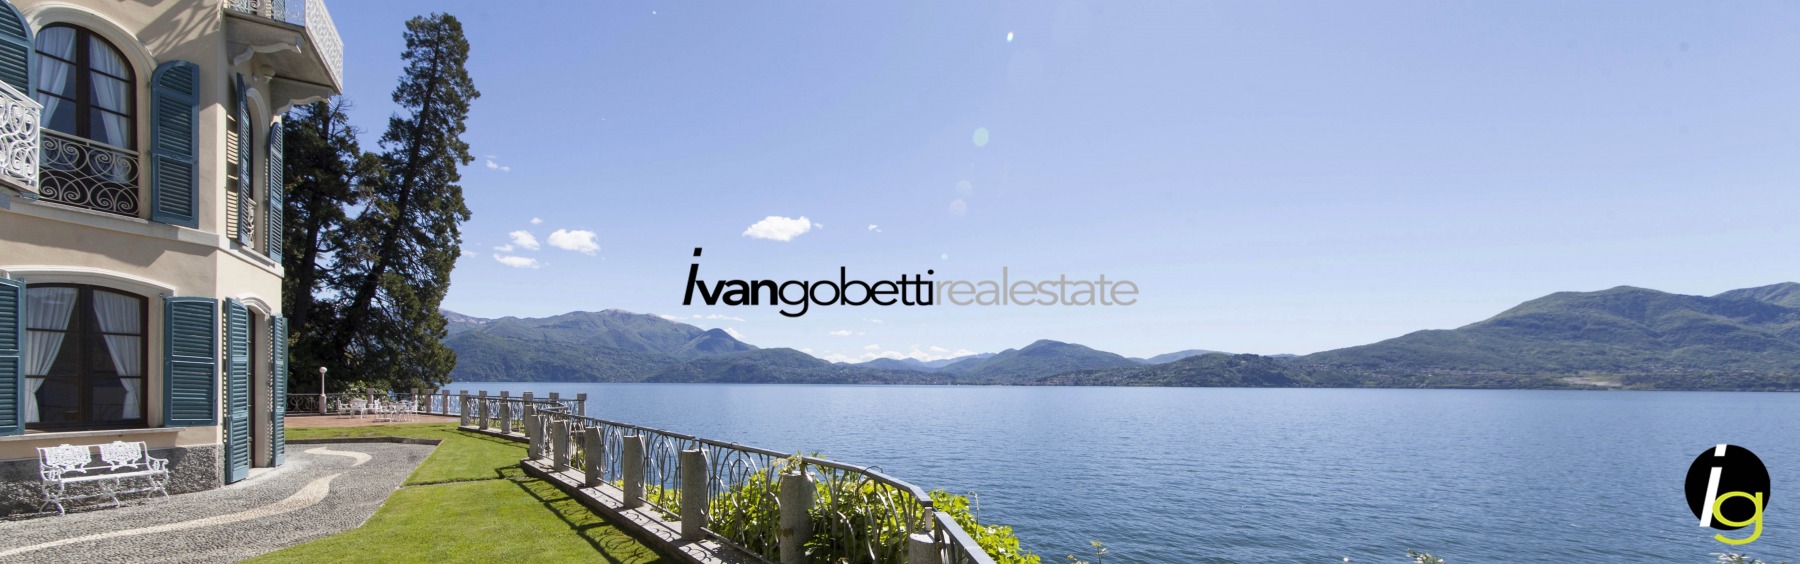 Historic Liberty style waterfront villa for sale on Lake Maggiore<br/><span>Product Code: 1939